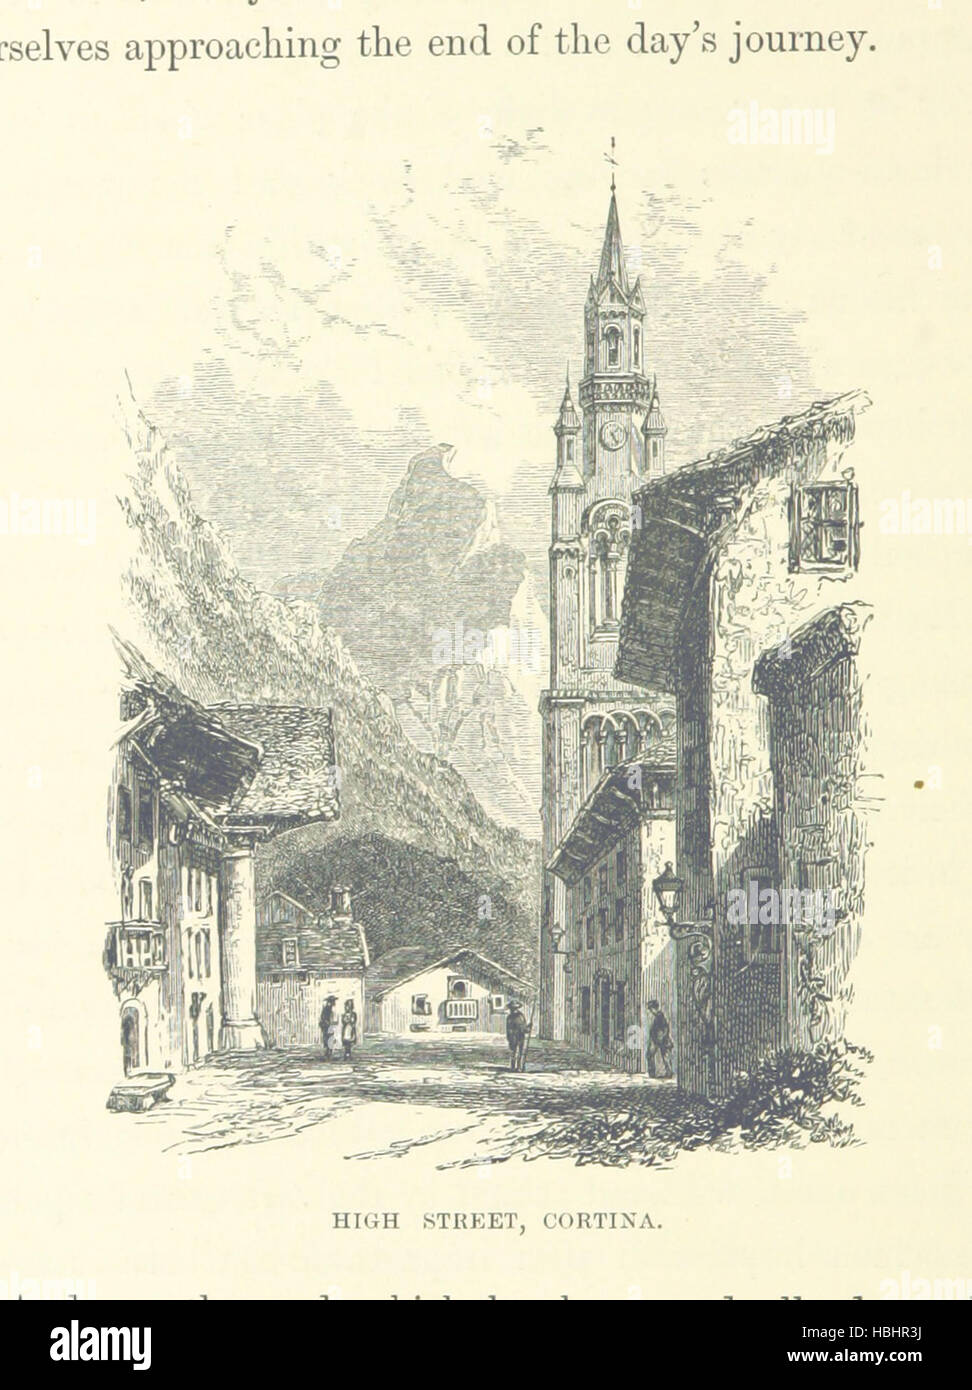 Image taken from page 86 of 'Untrodden Peaks and Unfrequented Valleys: a midsummer ramble in the Dolomites' Image taken from page 86 of 'Untrodden Peaks and Unfrequented Stock Photo